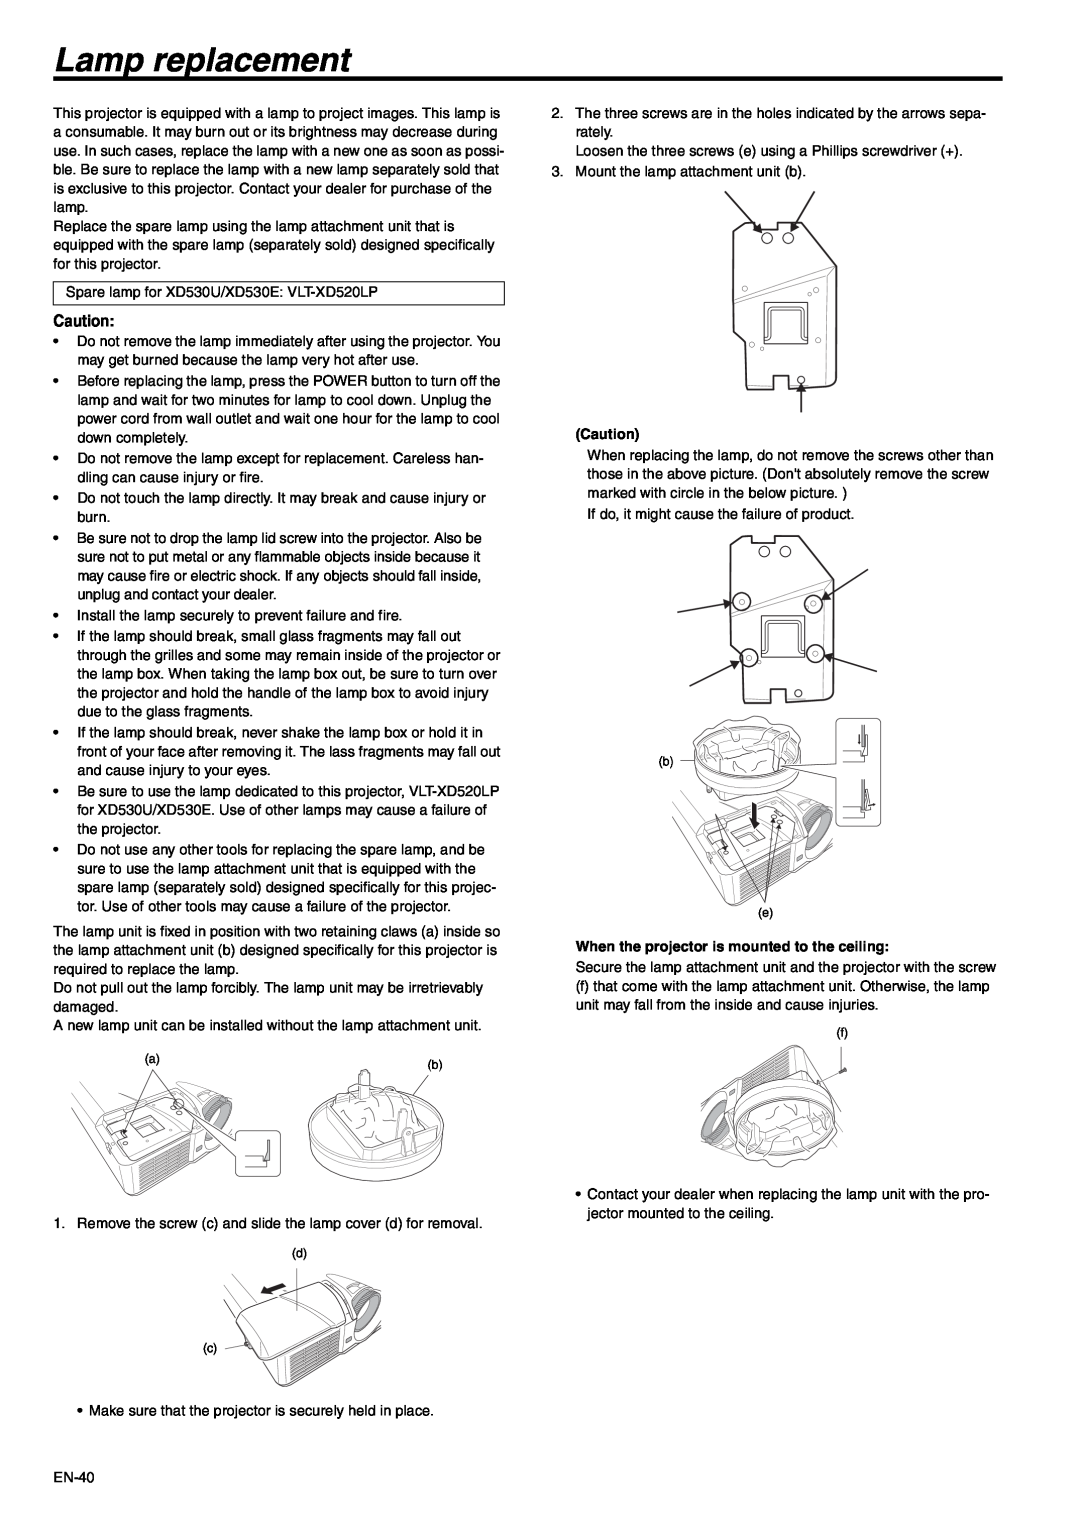 Mitsubishi Electronics XD530U, XD530E user manual Lamp replacement, When the projector is mounted to the ceiling 